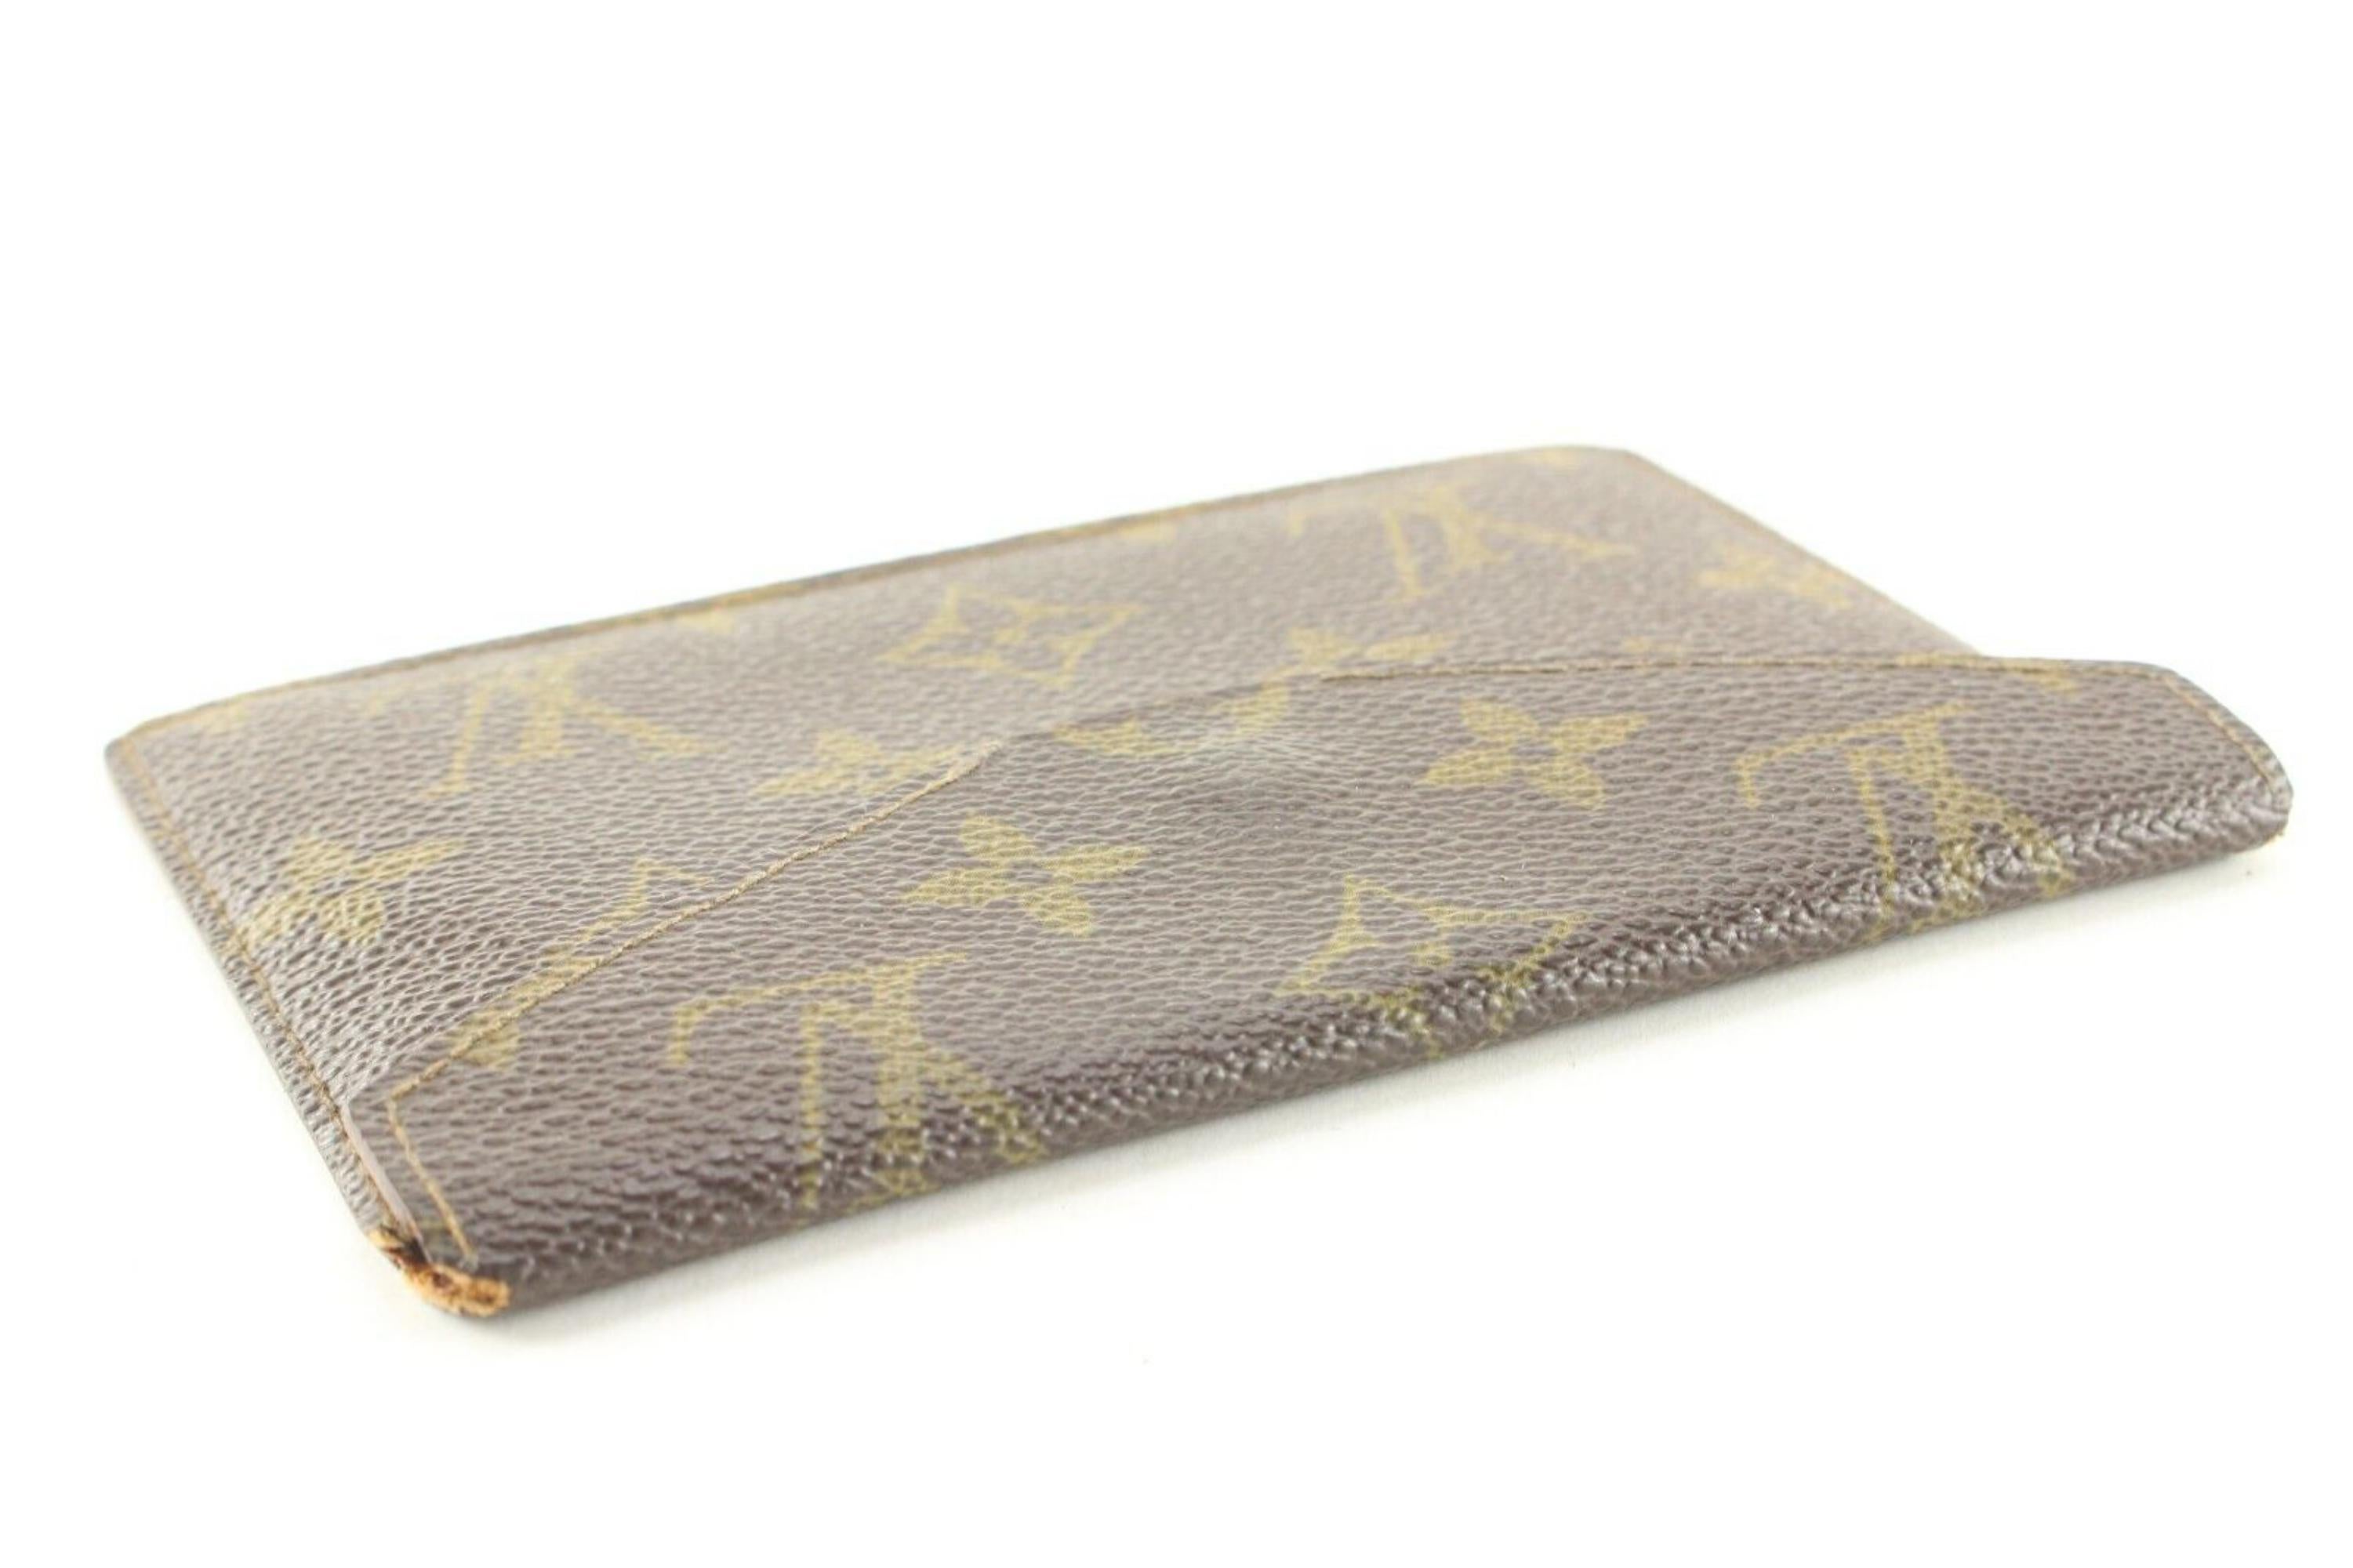 Louis Vuitton Extremely Rare Card Holder Envelope Pouch 3LV0509 4